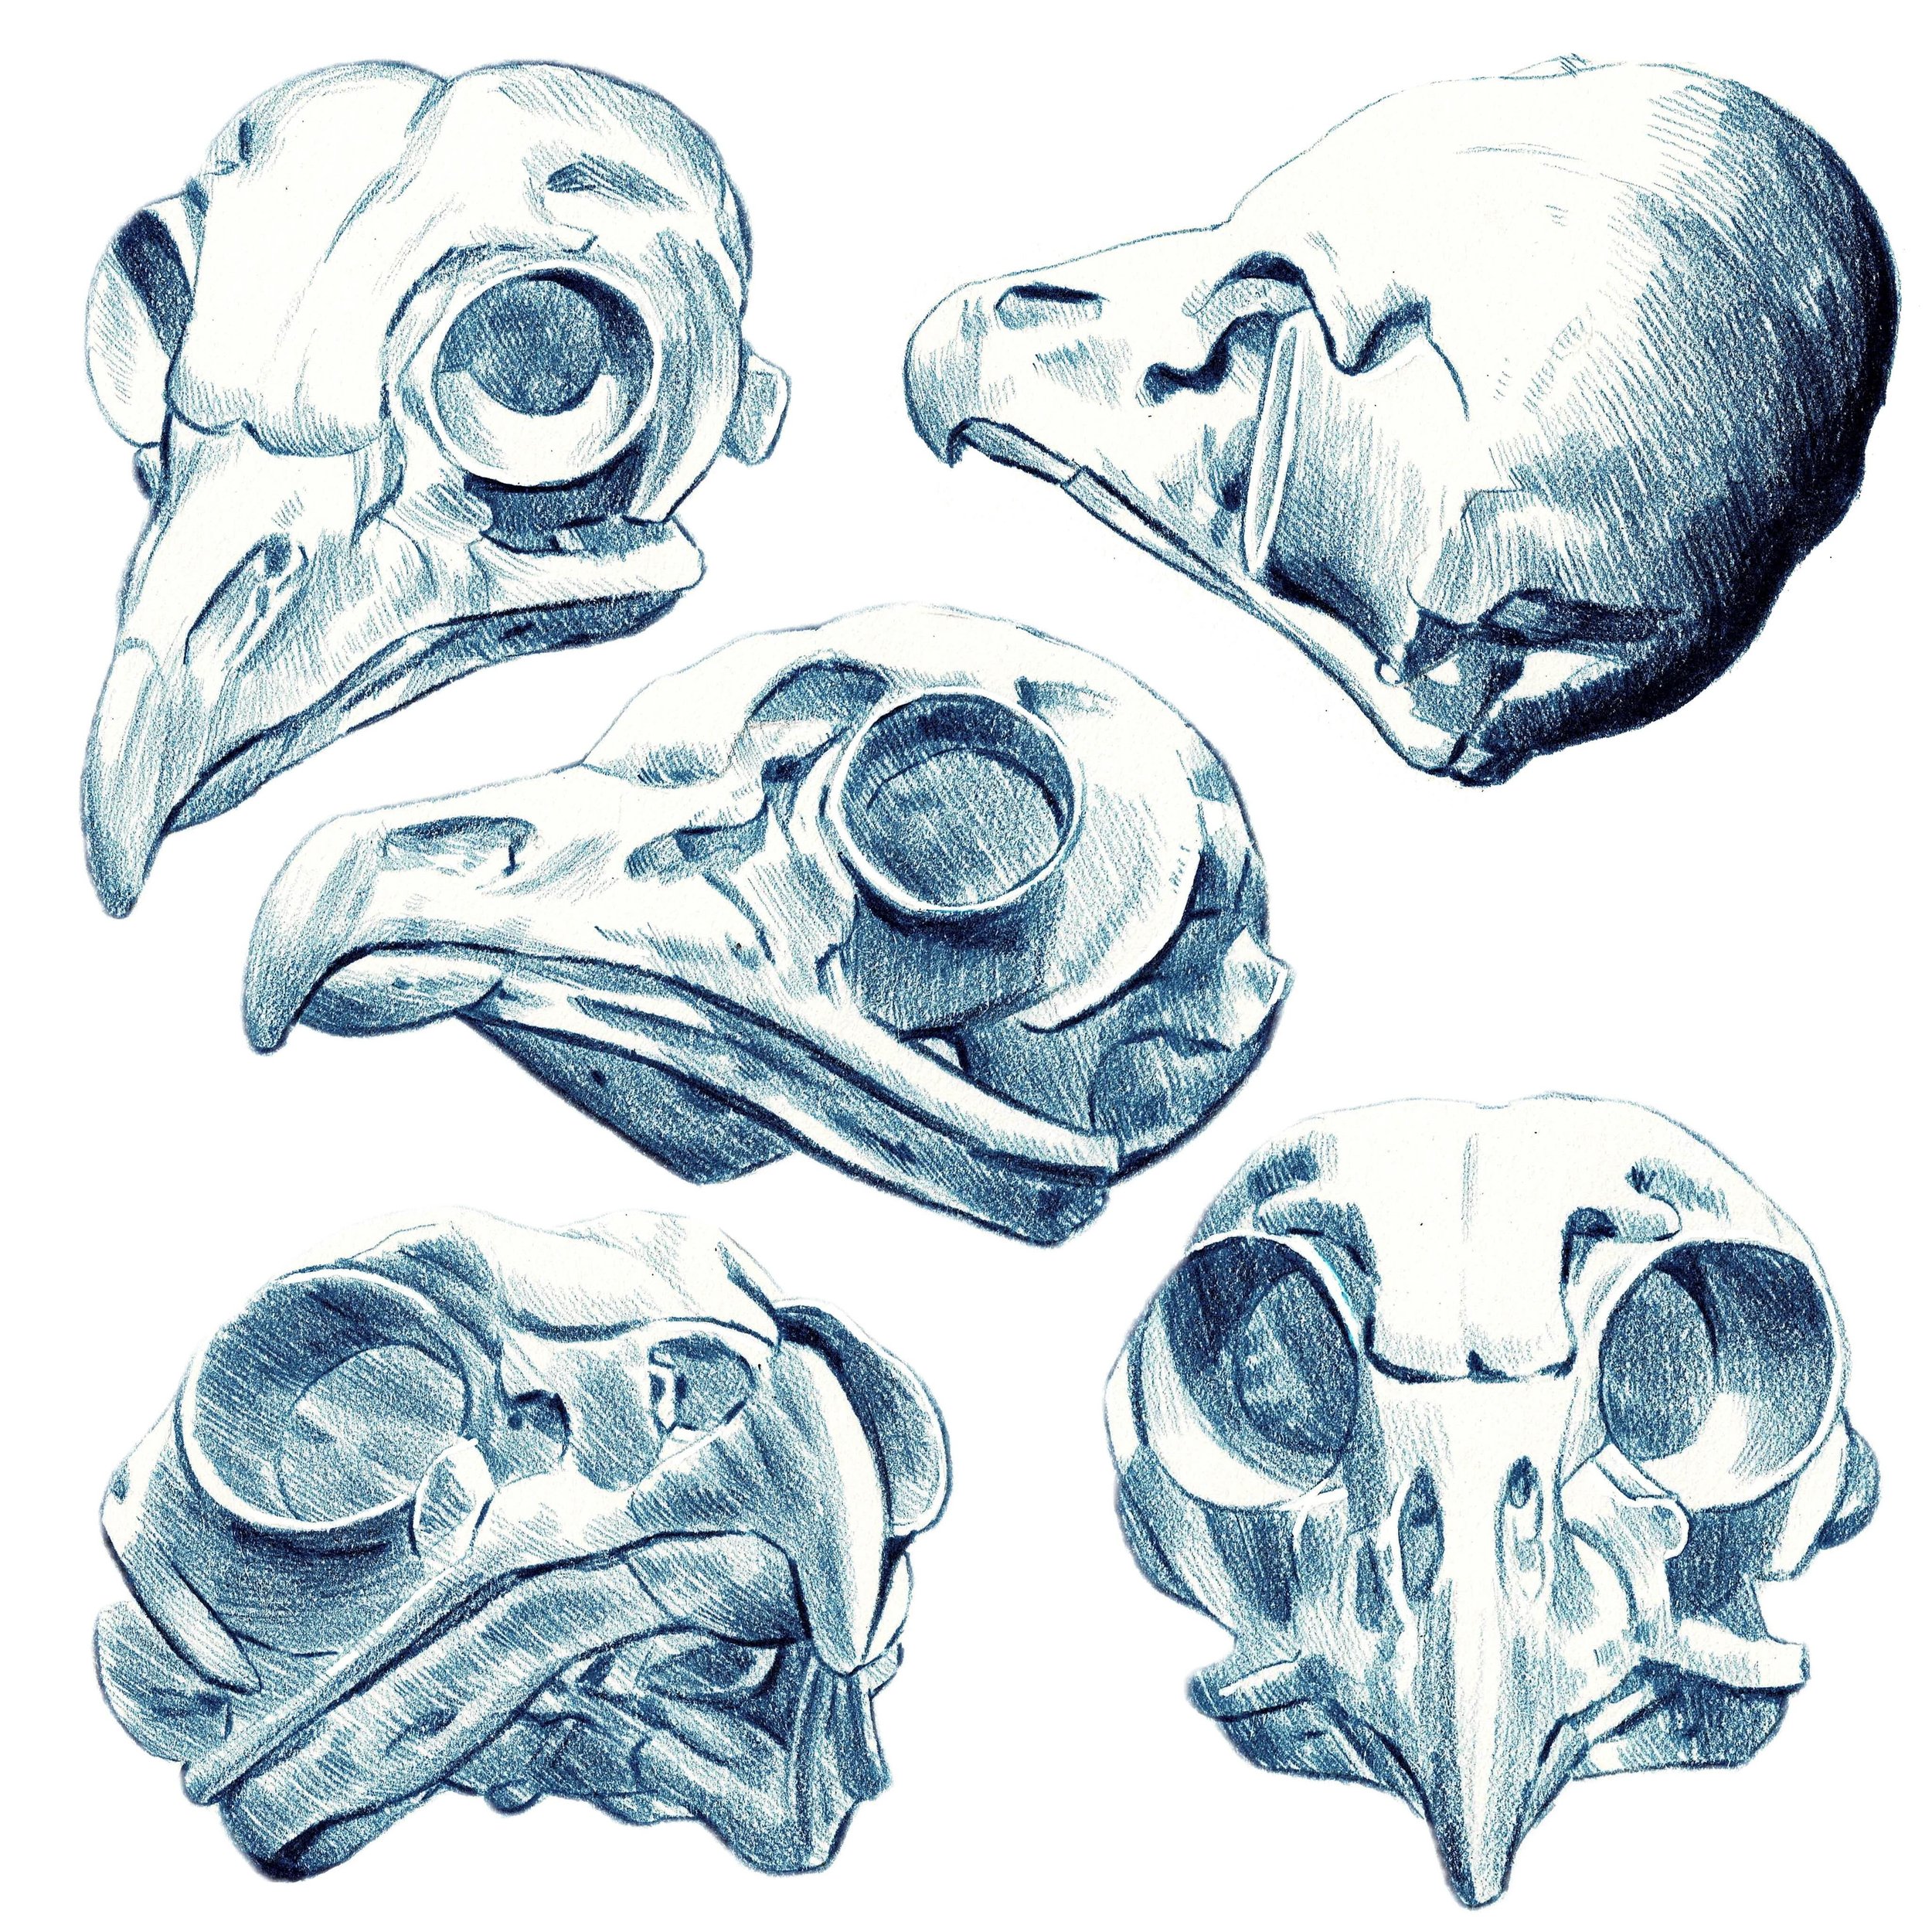 Working in a series is a great way to explore the same subject. I learn so much when I explore multiple angles!

I practiced with a 3D owl skull model and used an Indigo Blue Prismacolor Pencil to develop shadows. I focused on the consistency of line